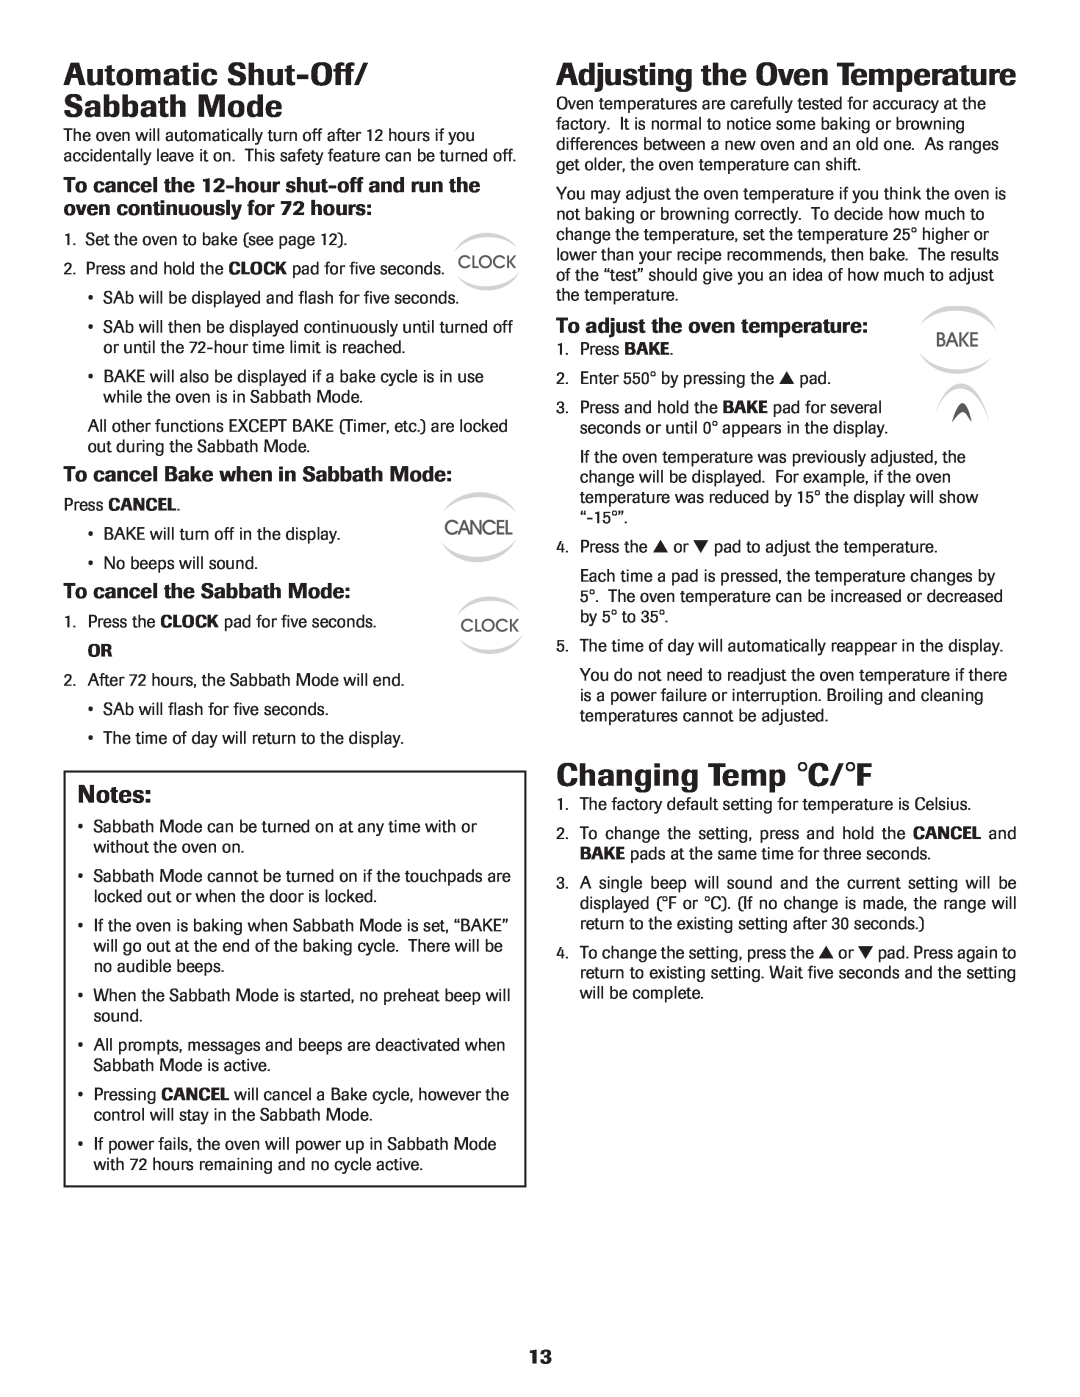 Maytag CER3725AGW Automatic Shut-Off Sabbath Mode, Adjusting the Oven Temperature, Changing Temp C/F 